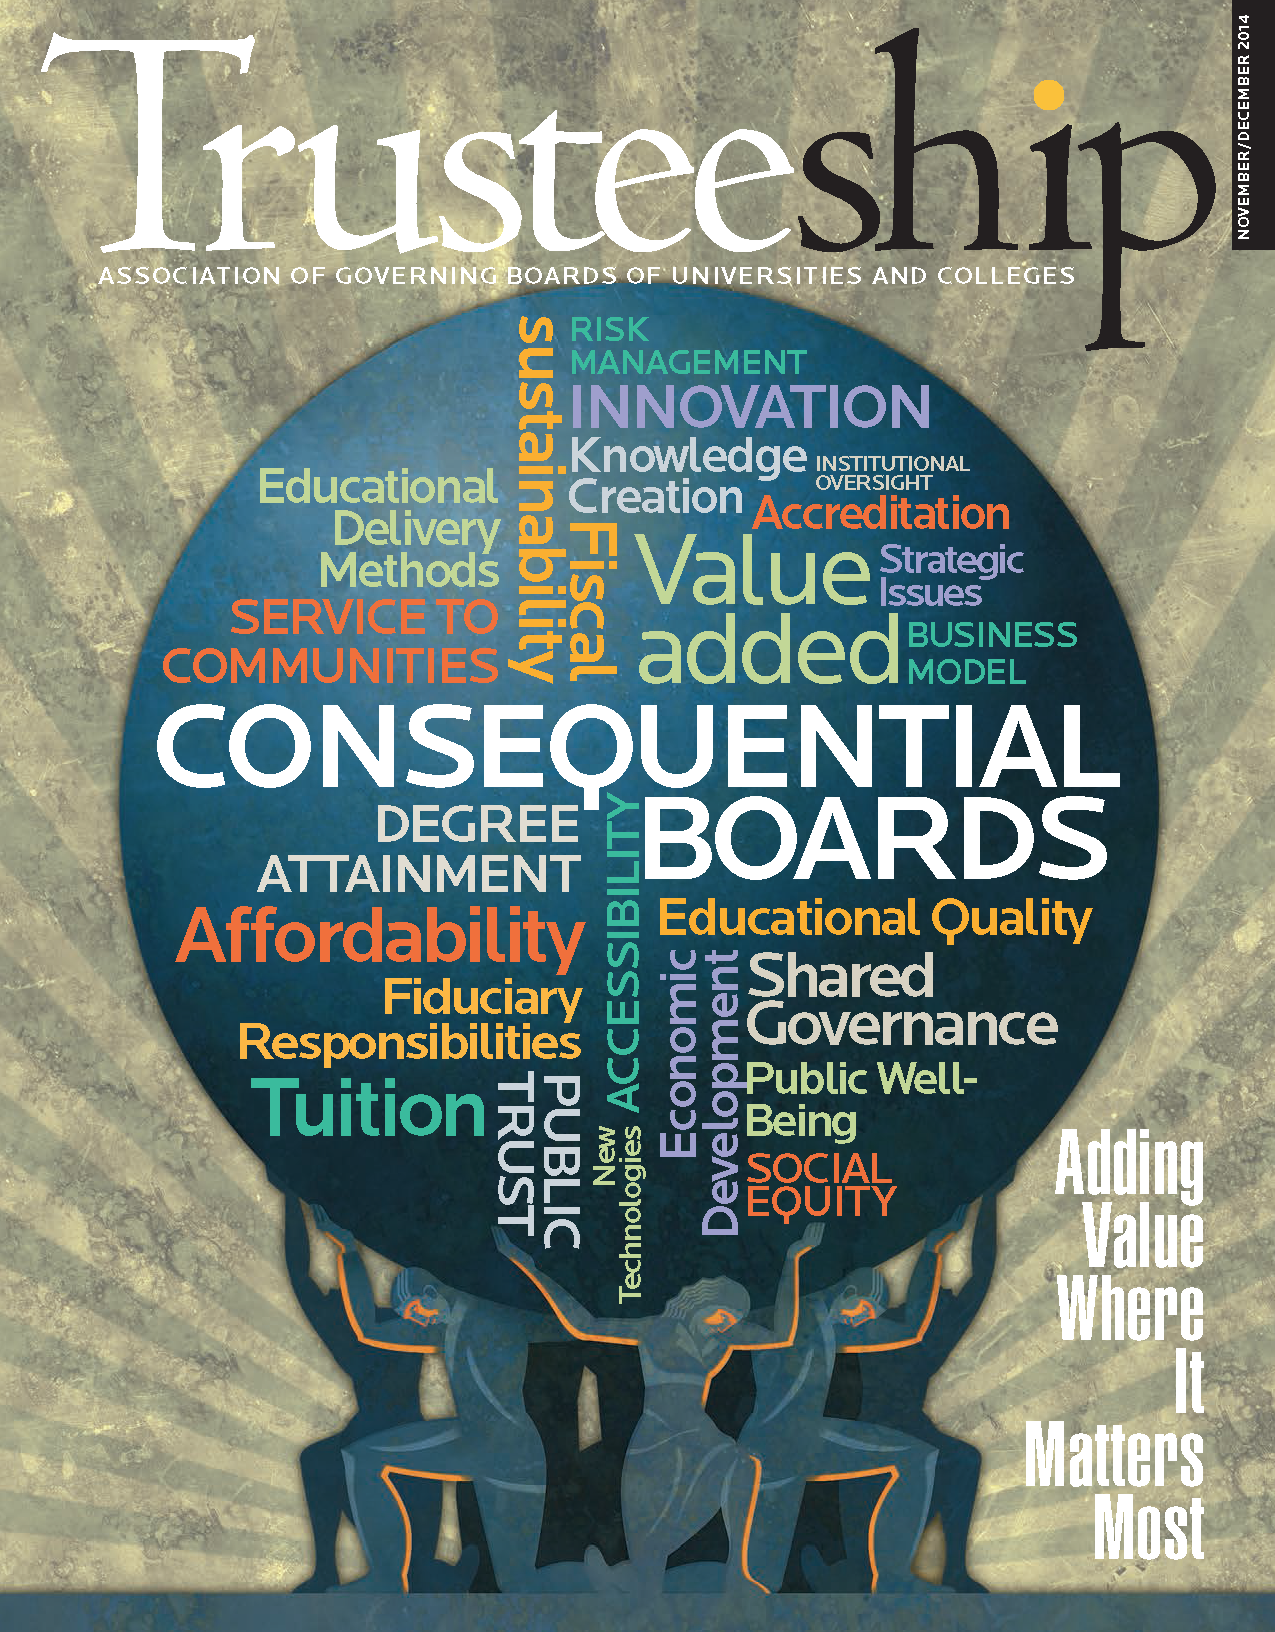 AGB Trusteeship Magazine: November/December 2014, with cover article "Consequential Boards"